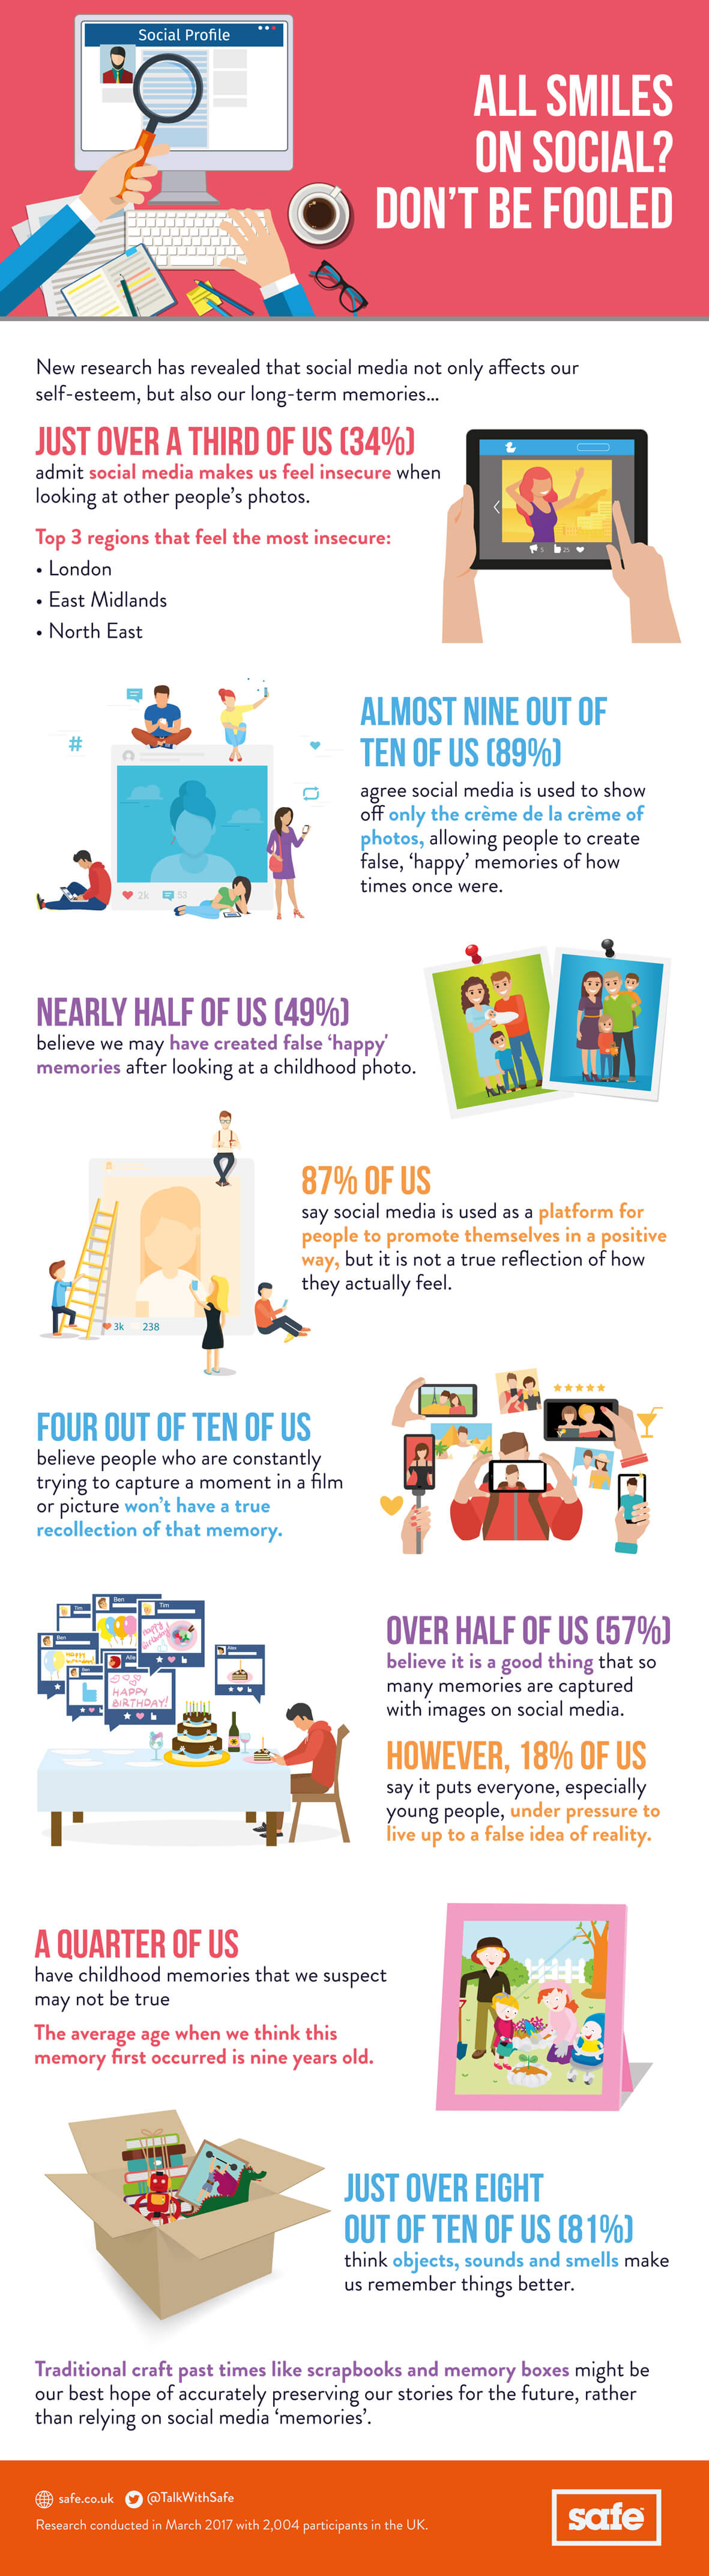 All-smiles-on-social-dont-be-fooled-infographic-plaza